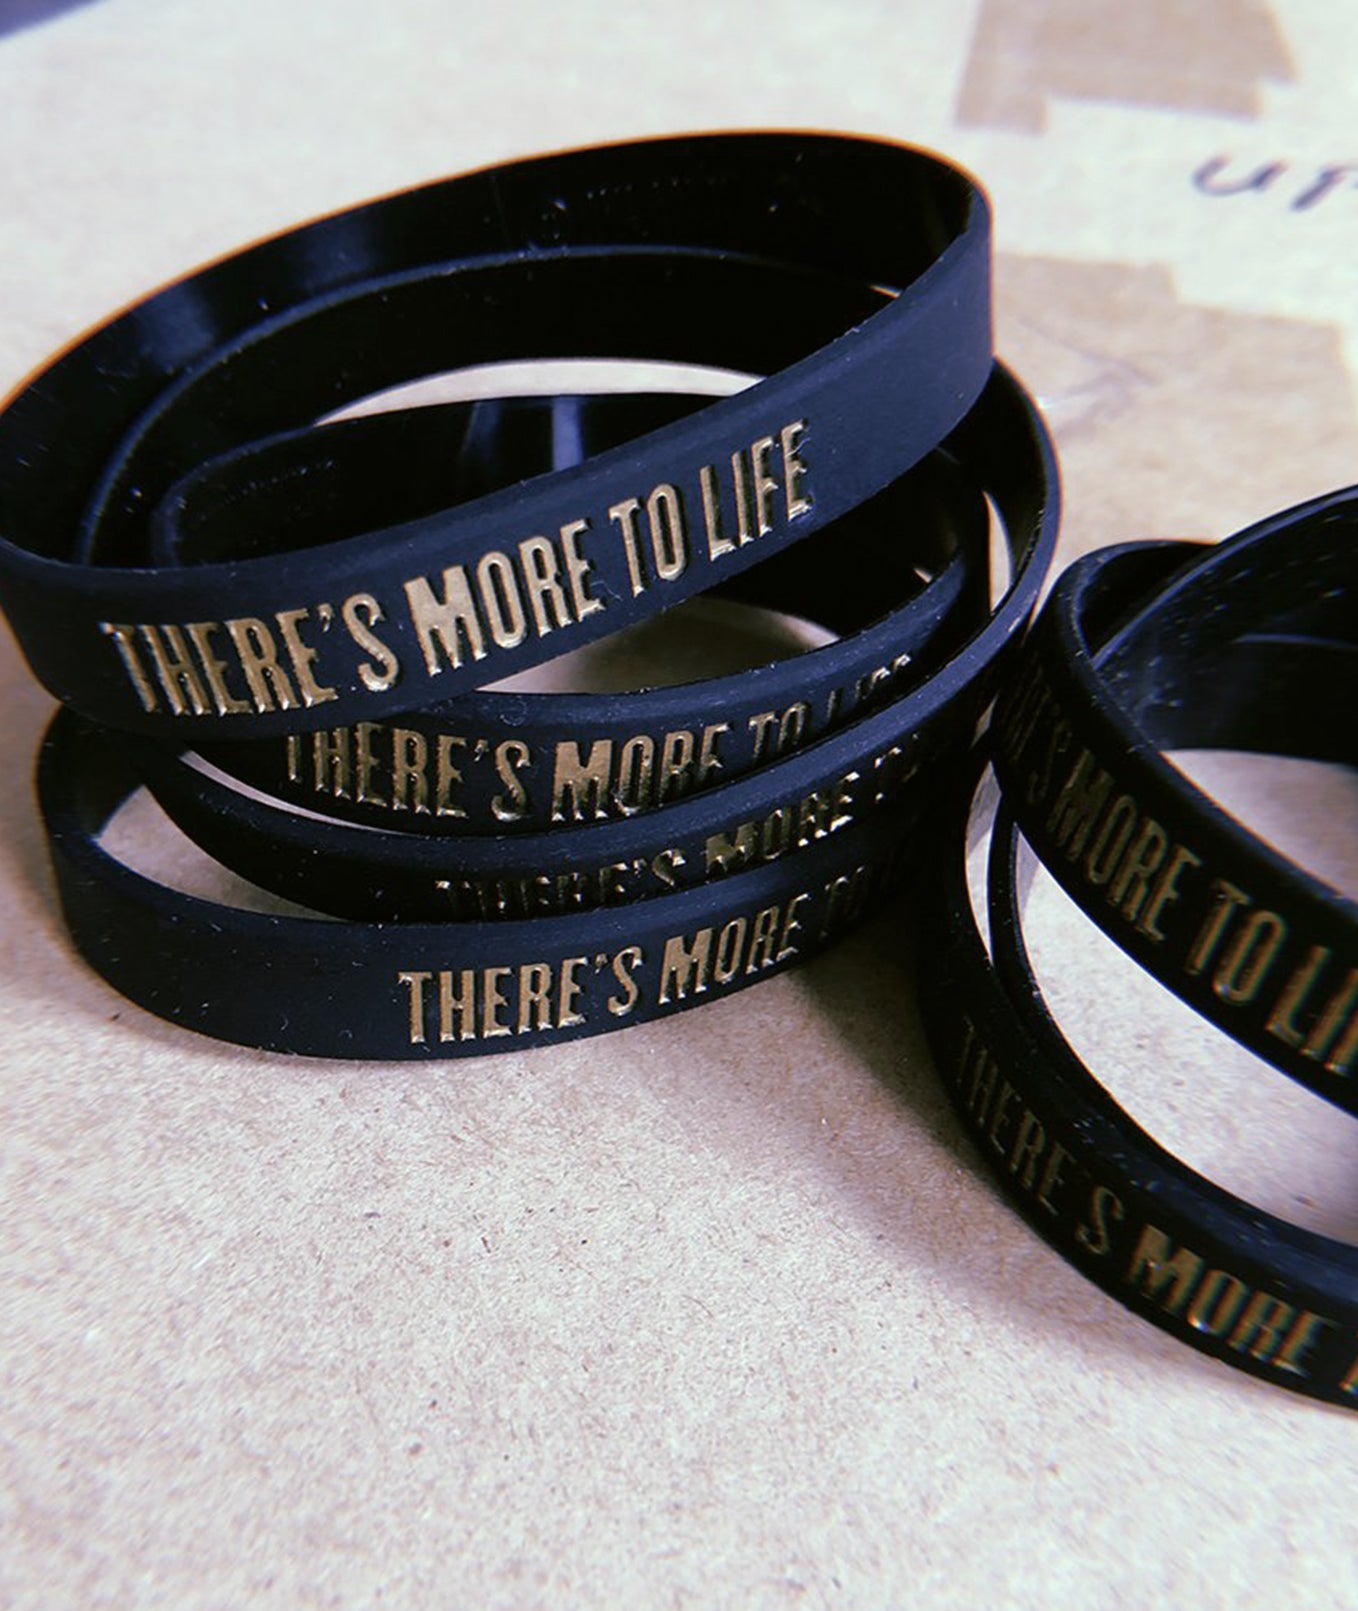 There's More To Life Wristband